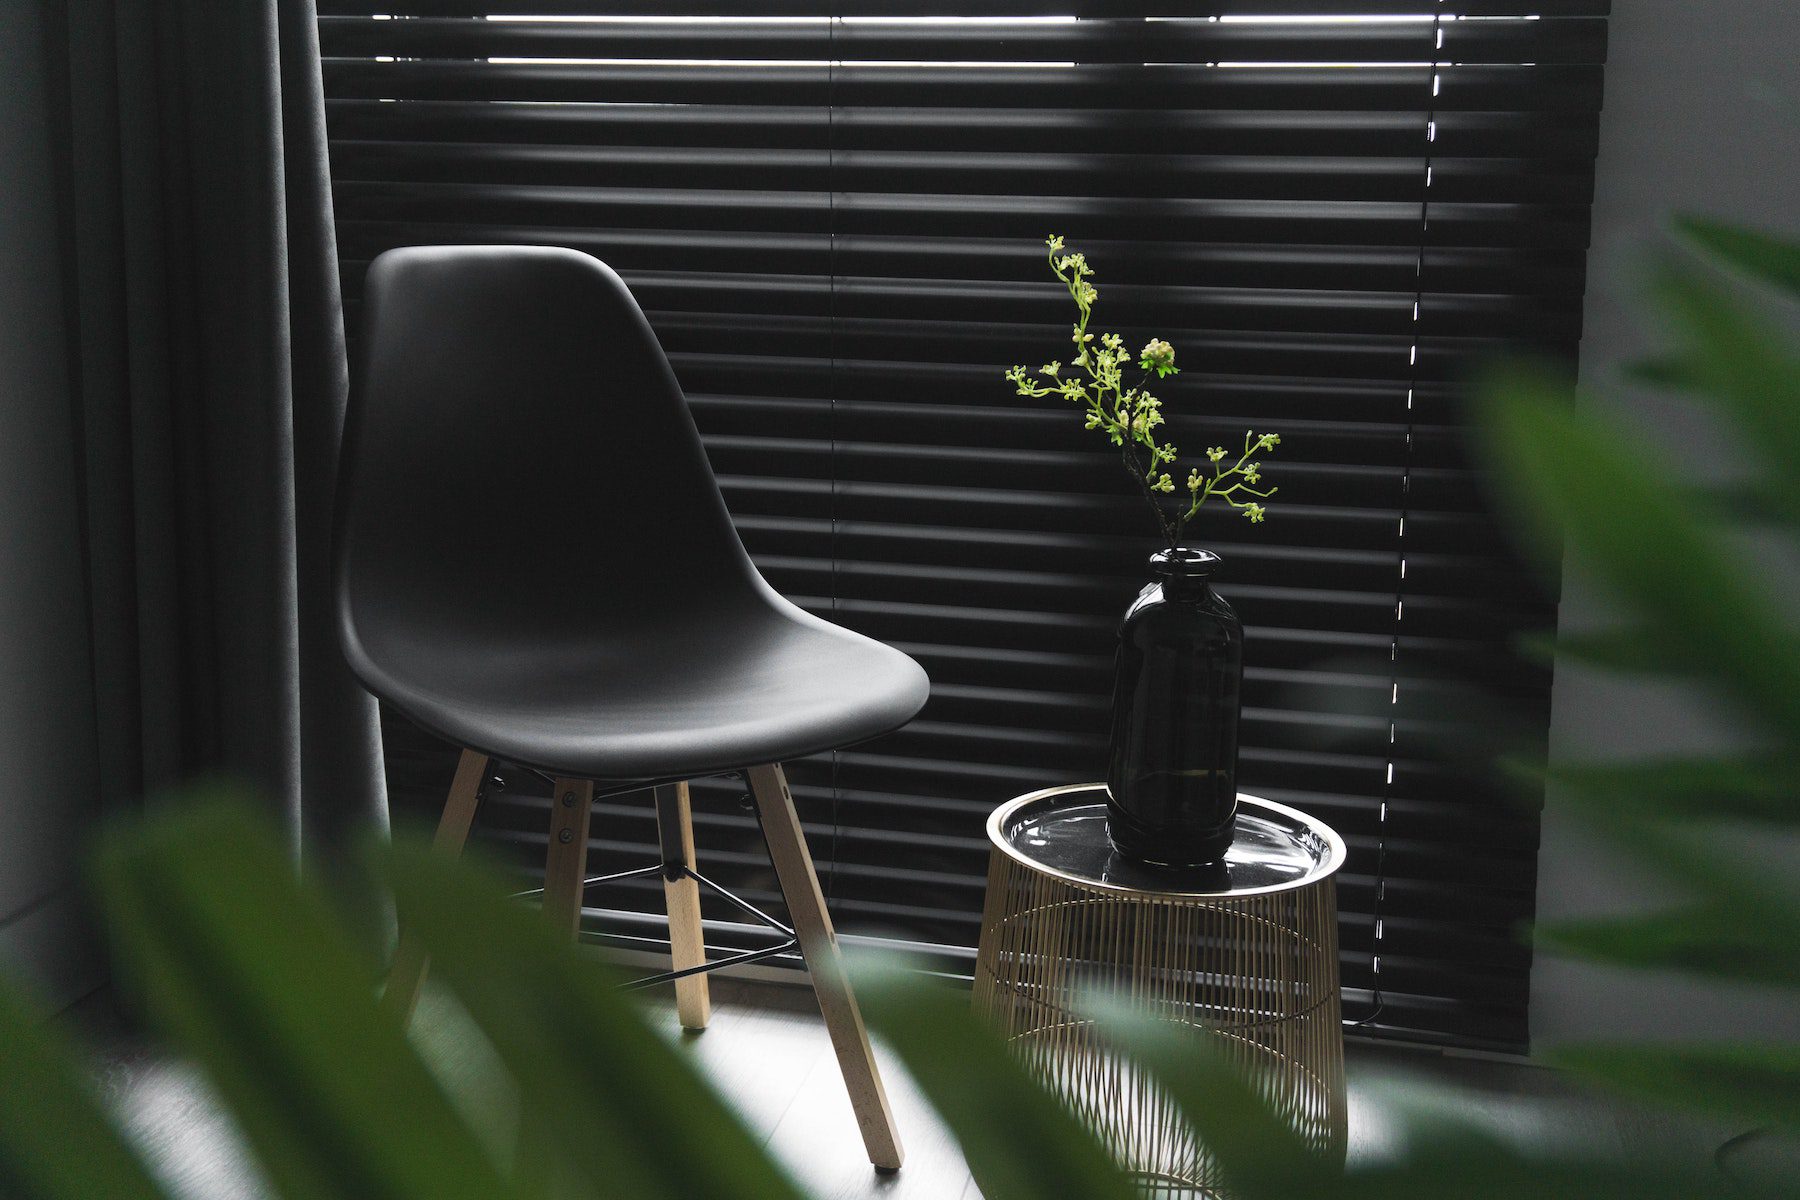 A modern style chair in front of a window next to a side table with a plant in a vase